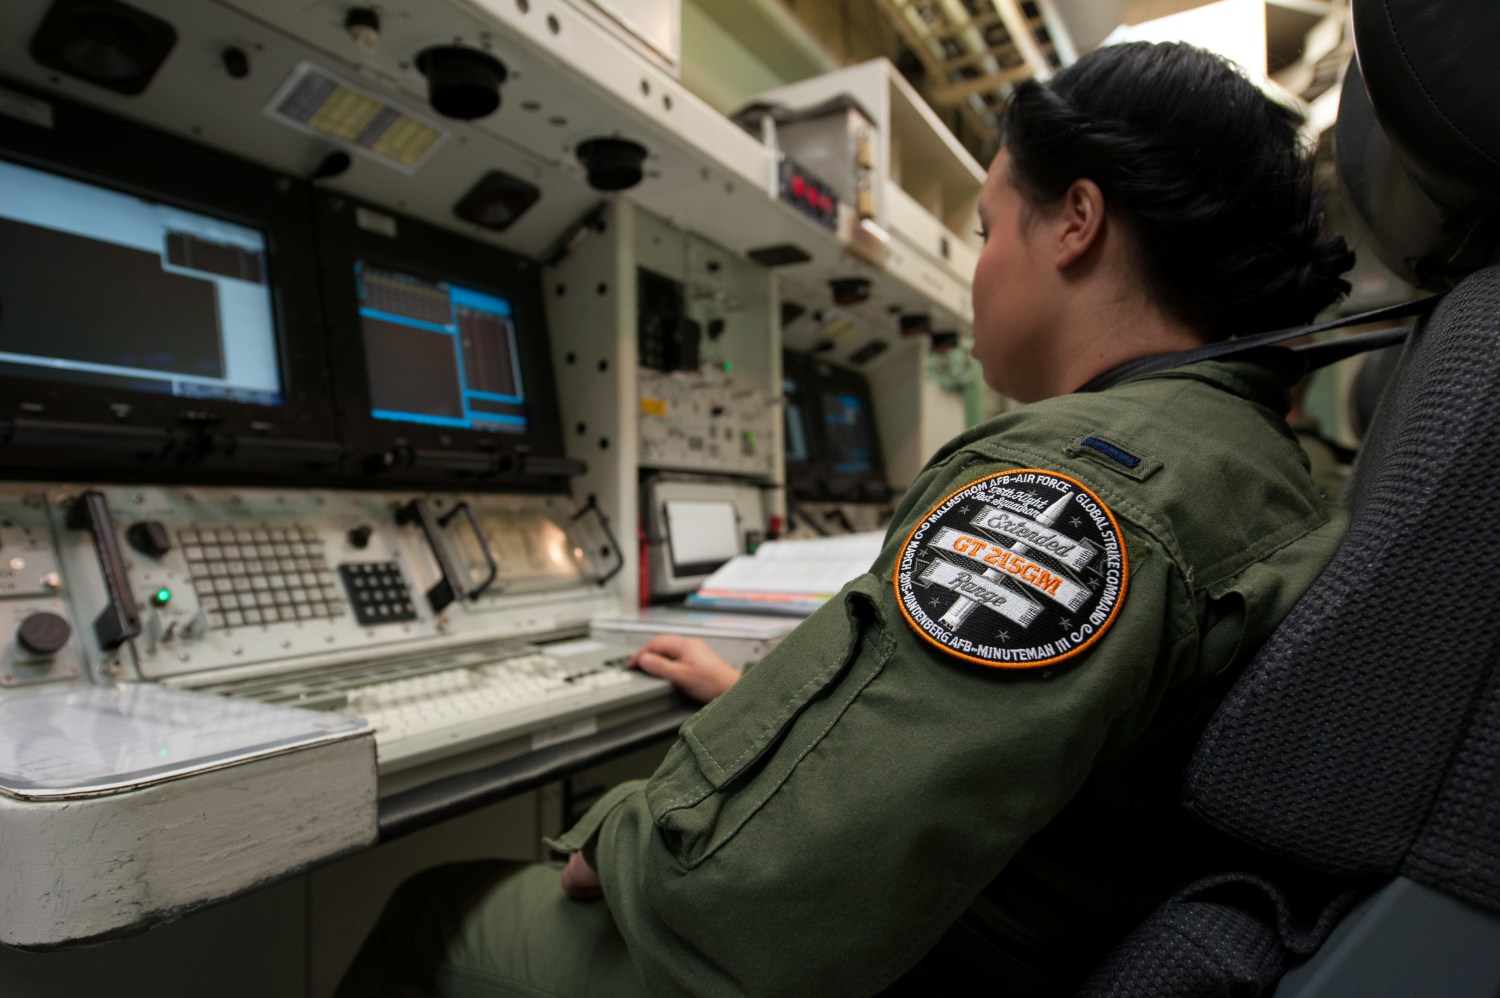 In preparation for an unarmed Minuteman III intercontinental ballistic missile launch, 1st Lt. Kimberly Erskine, Missile Combat Crew commander from Malmstrom Air Force Base, practices procedures at Vandenberg Air Force Base, California, U.S., March 19, 2015. Picture taken March 19, 2015. To Match Special Report USA-NUCLEAR/ICBM  U.S. Air Force/Michael Peterson/Handout via REUTERS  ATTENTION EDITORS - THIS IMAGE WAS PROVIDED BY A THIRD PARTY.